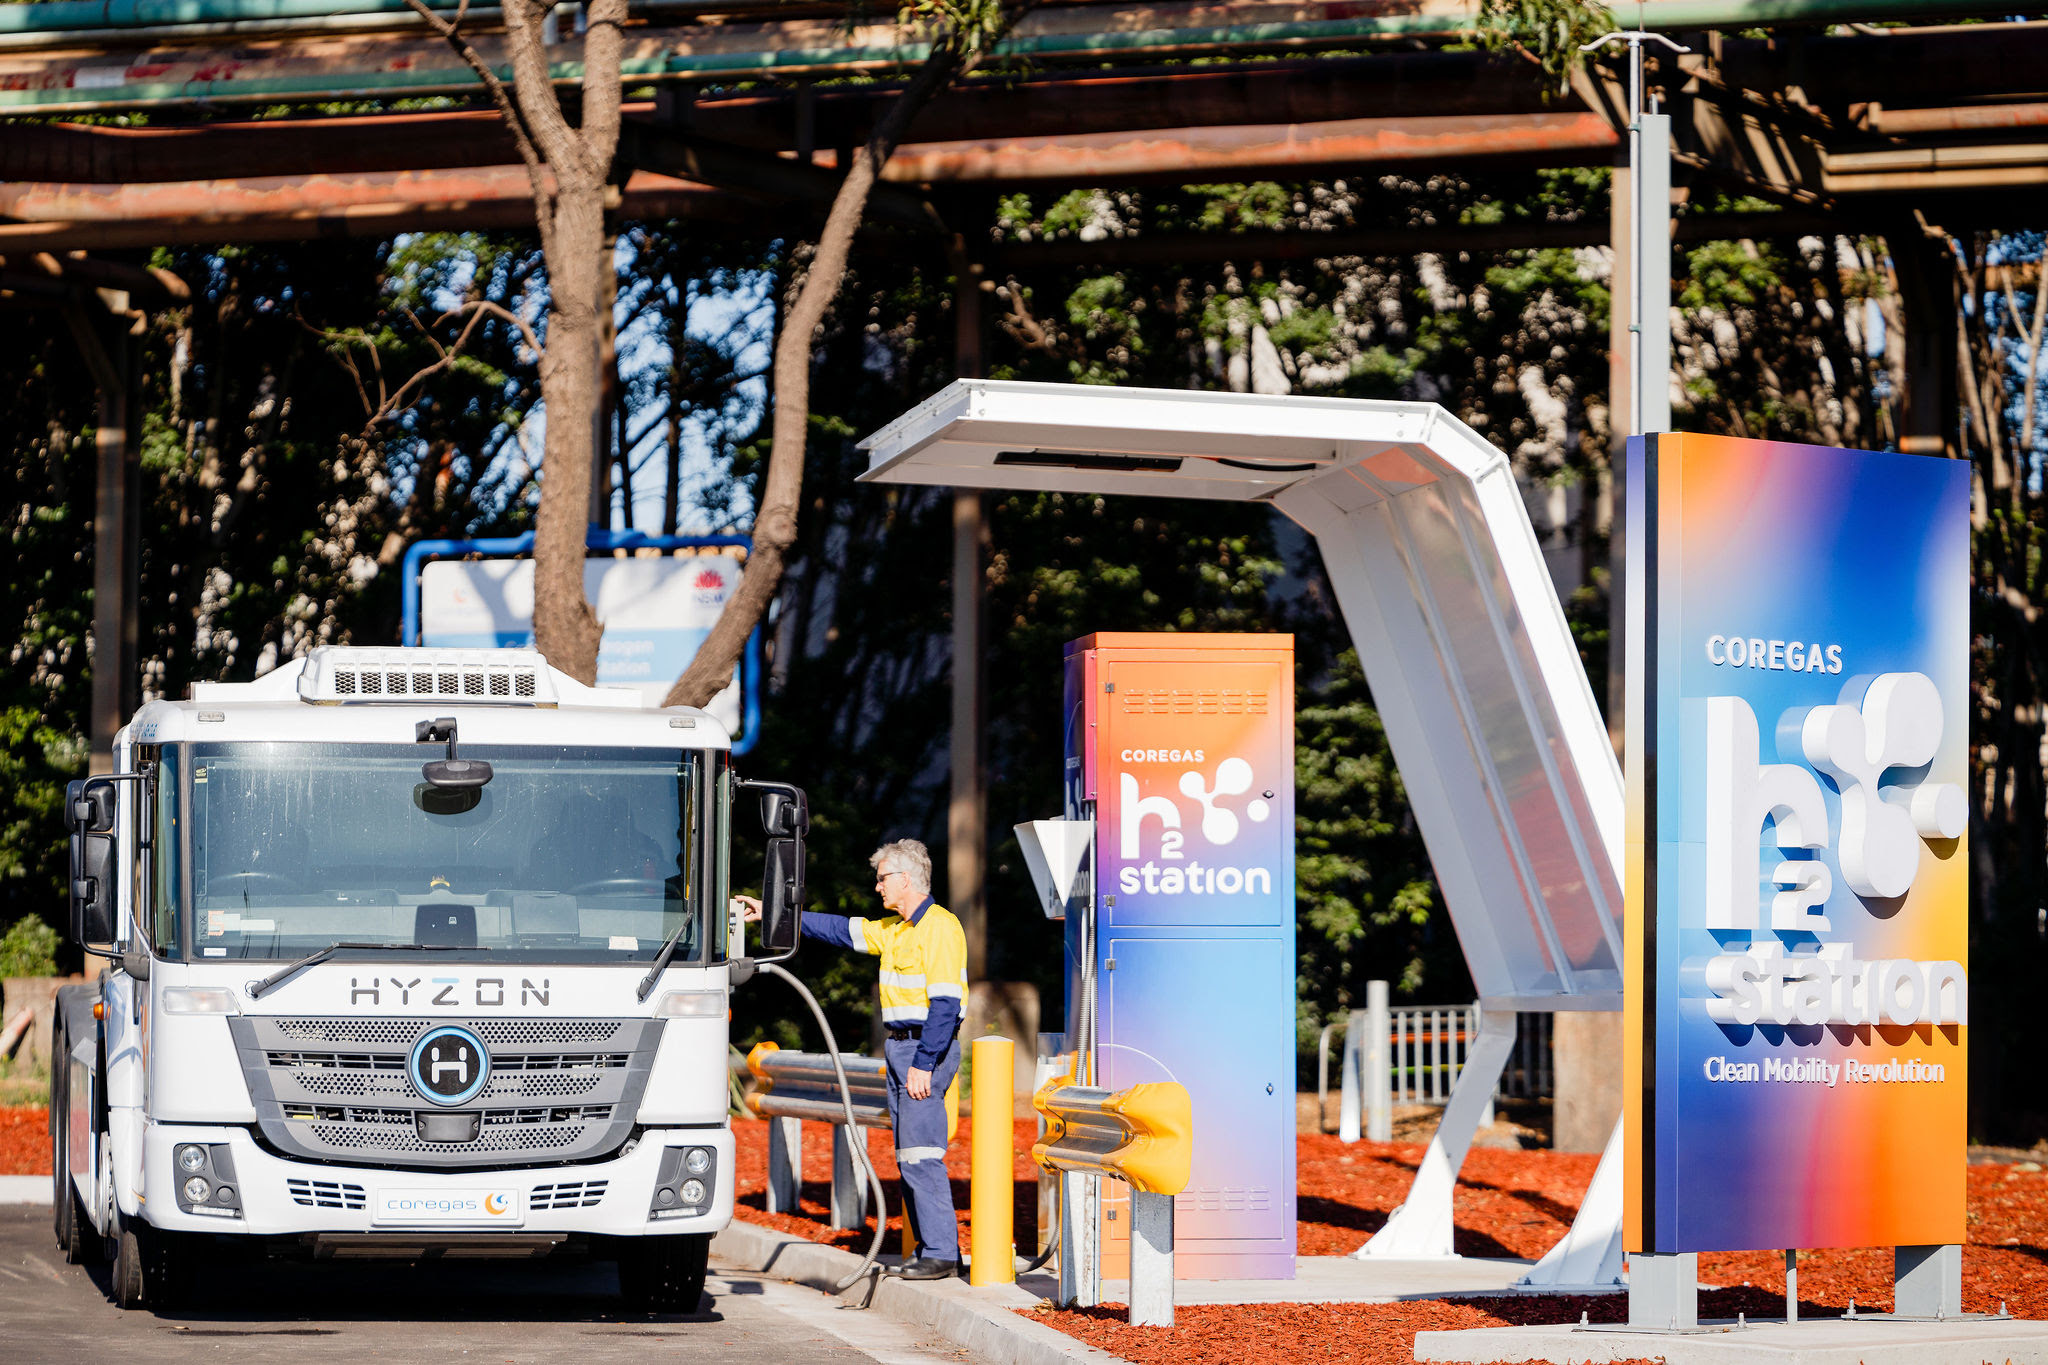 CSIRO Hydrogen-powered vehicles will play a significant role in decarbonising road transport in Australia.